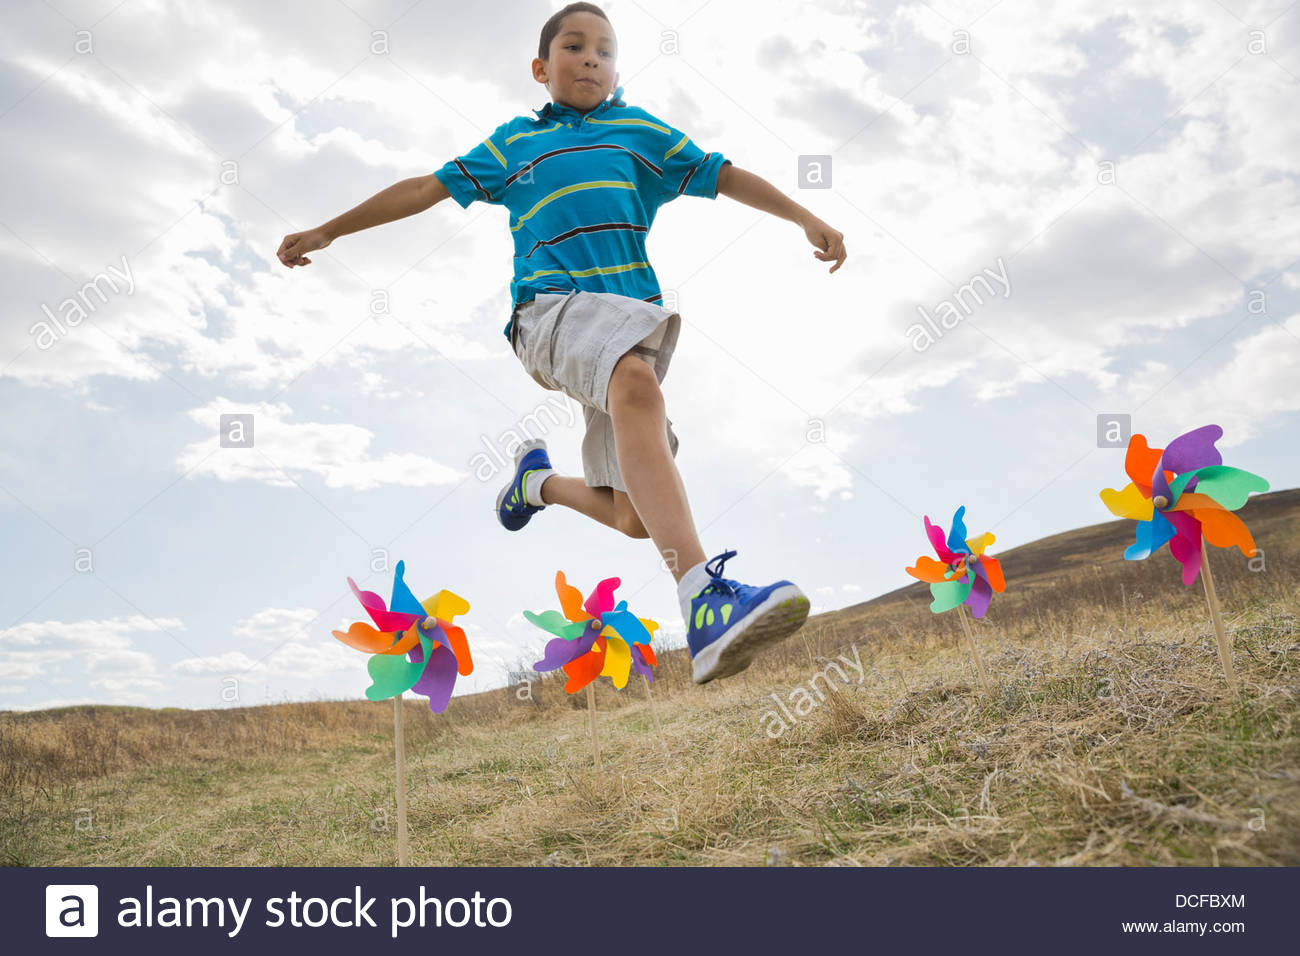 Schoolboy jumping over pinwheels in field Stock Photo